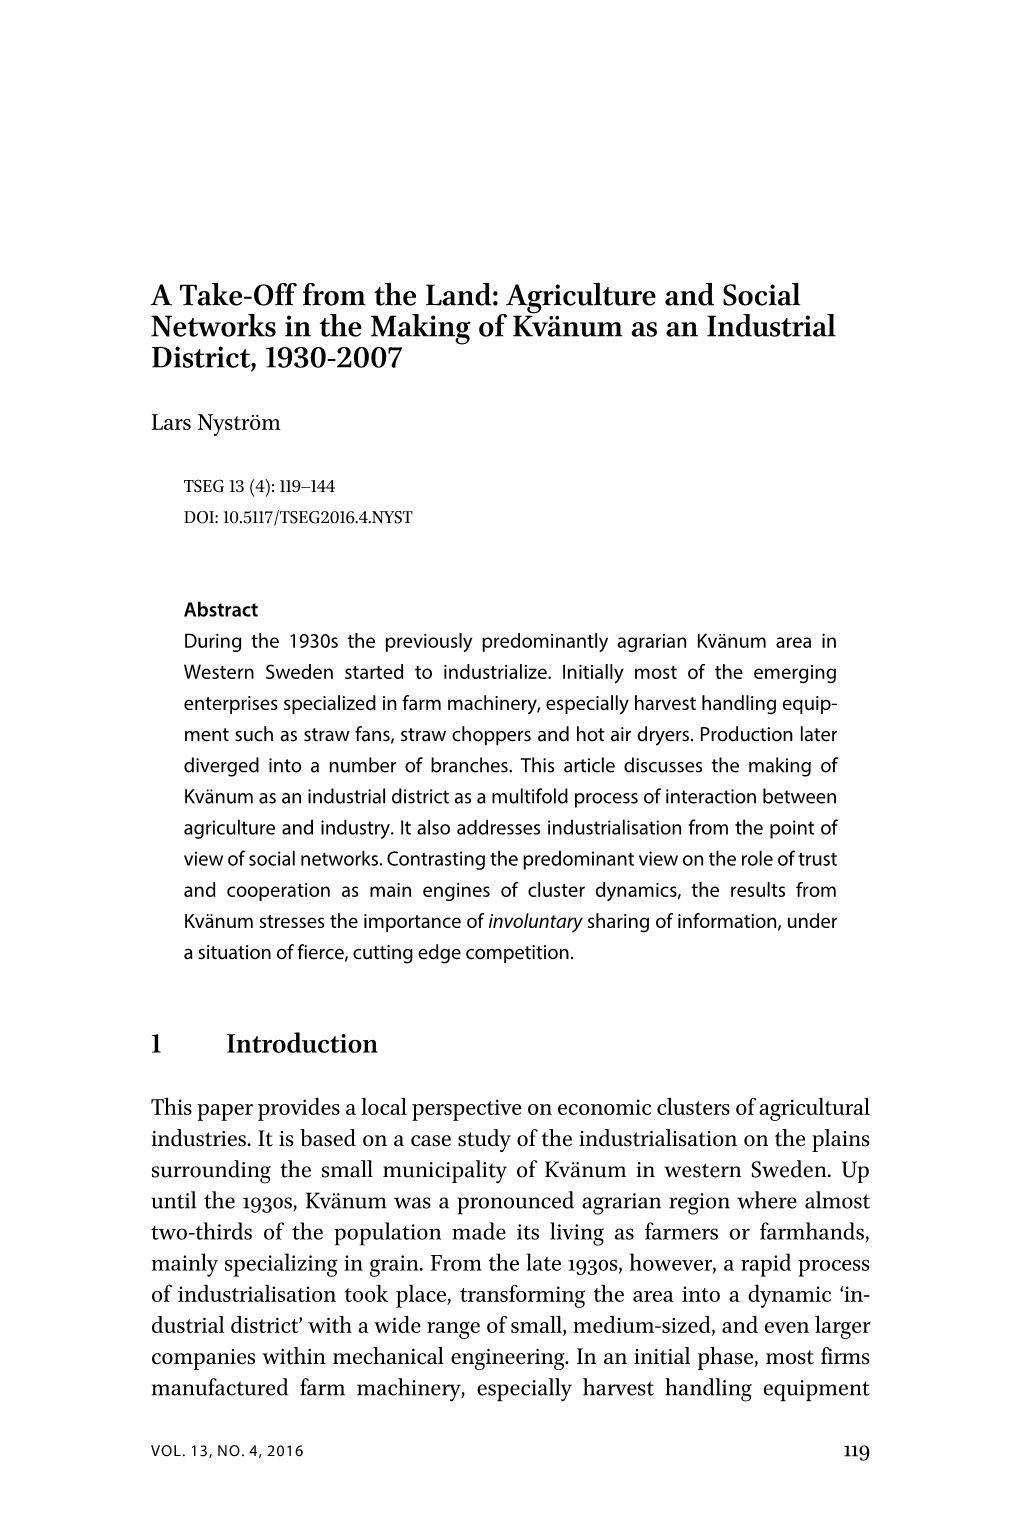 A Take-Off from the Land: Agriculture and Social Networks in the Making of Kvänum As an Industrial District, １９３０-２００７